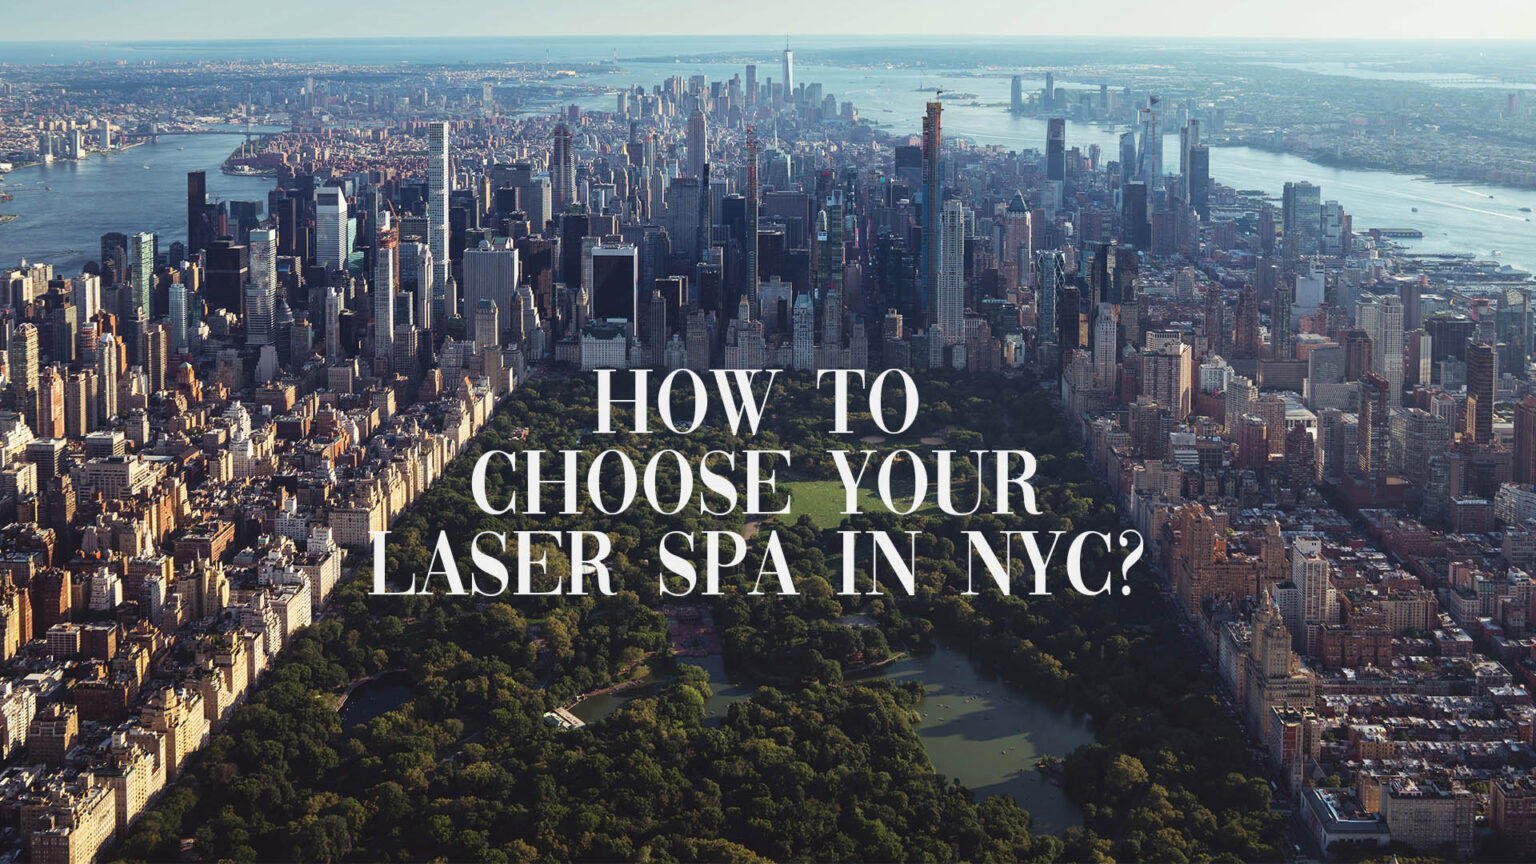 Learn how to select the ideal laser spa for you in NYC by reading our blog. Discover all the necessary information to make an informed choice.